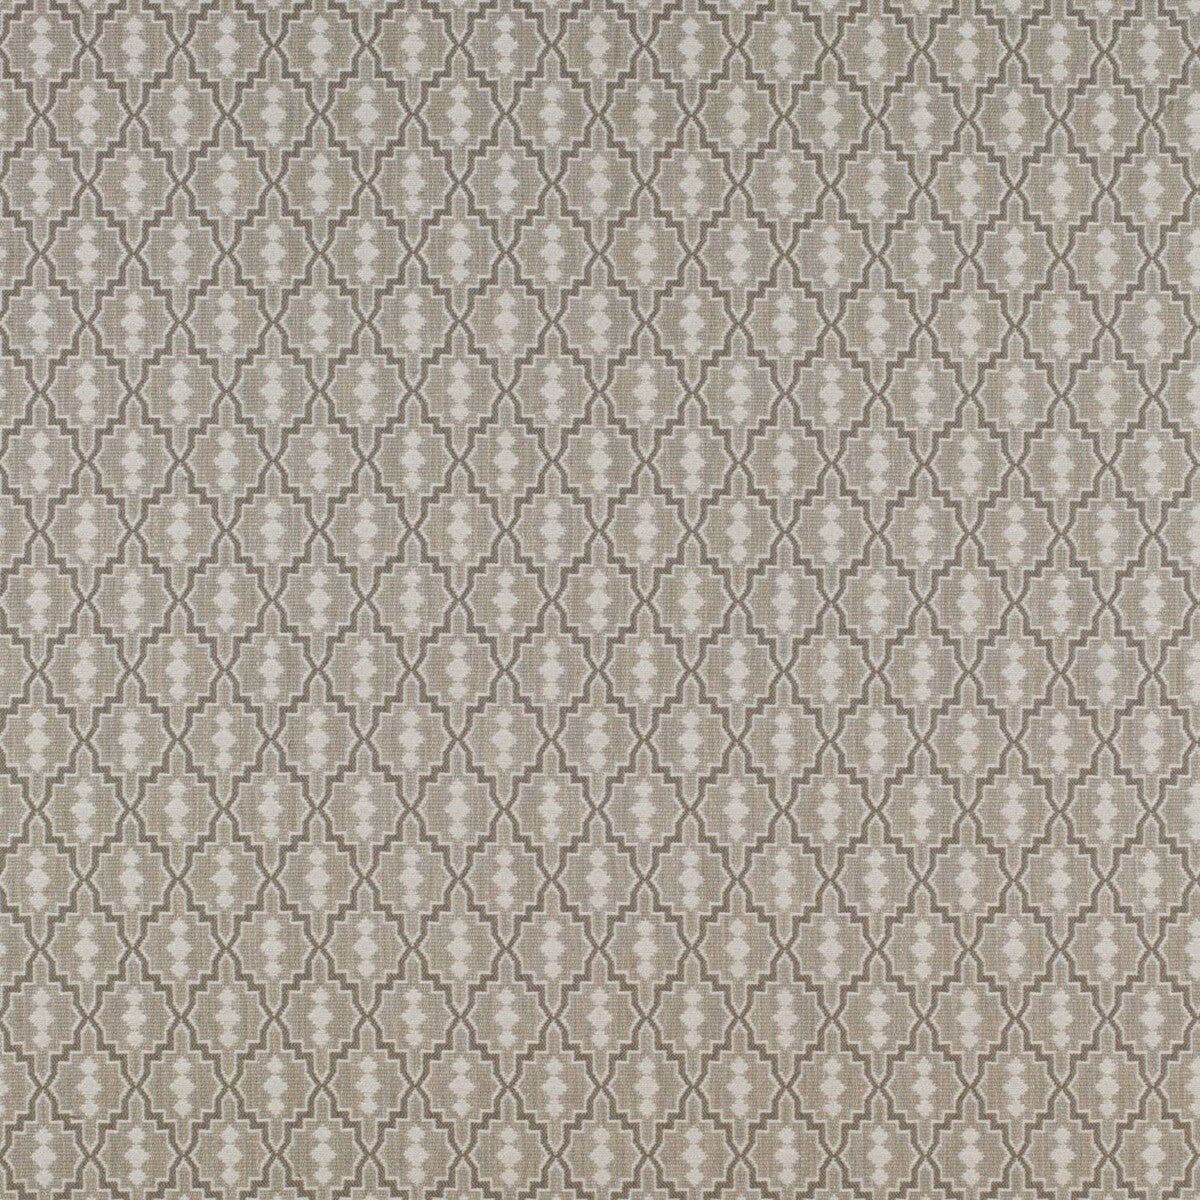 Aztec fabric in natural color - pattern GDT5152.007.0 - by Gaston y Daniela in the Gaston Uptown collection